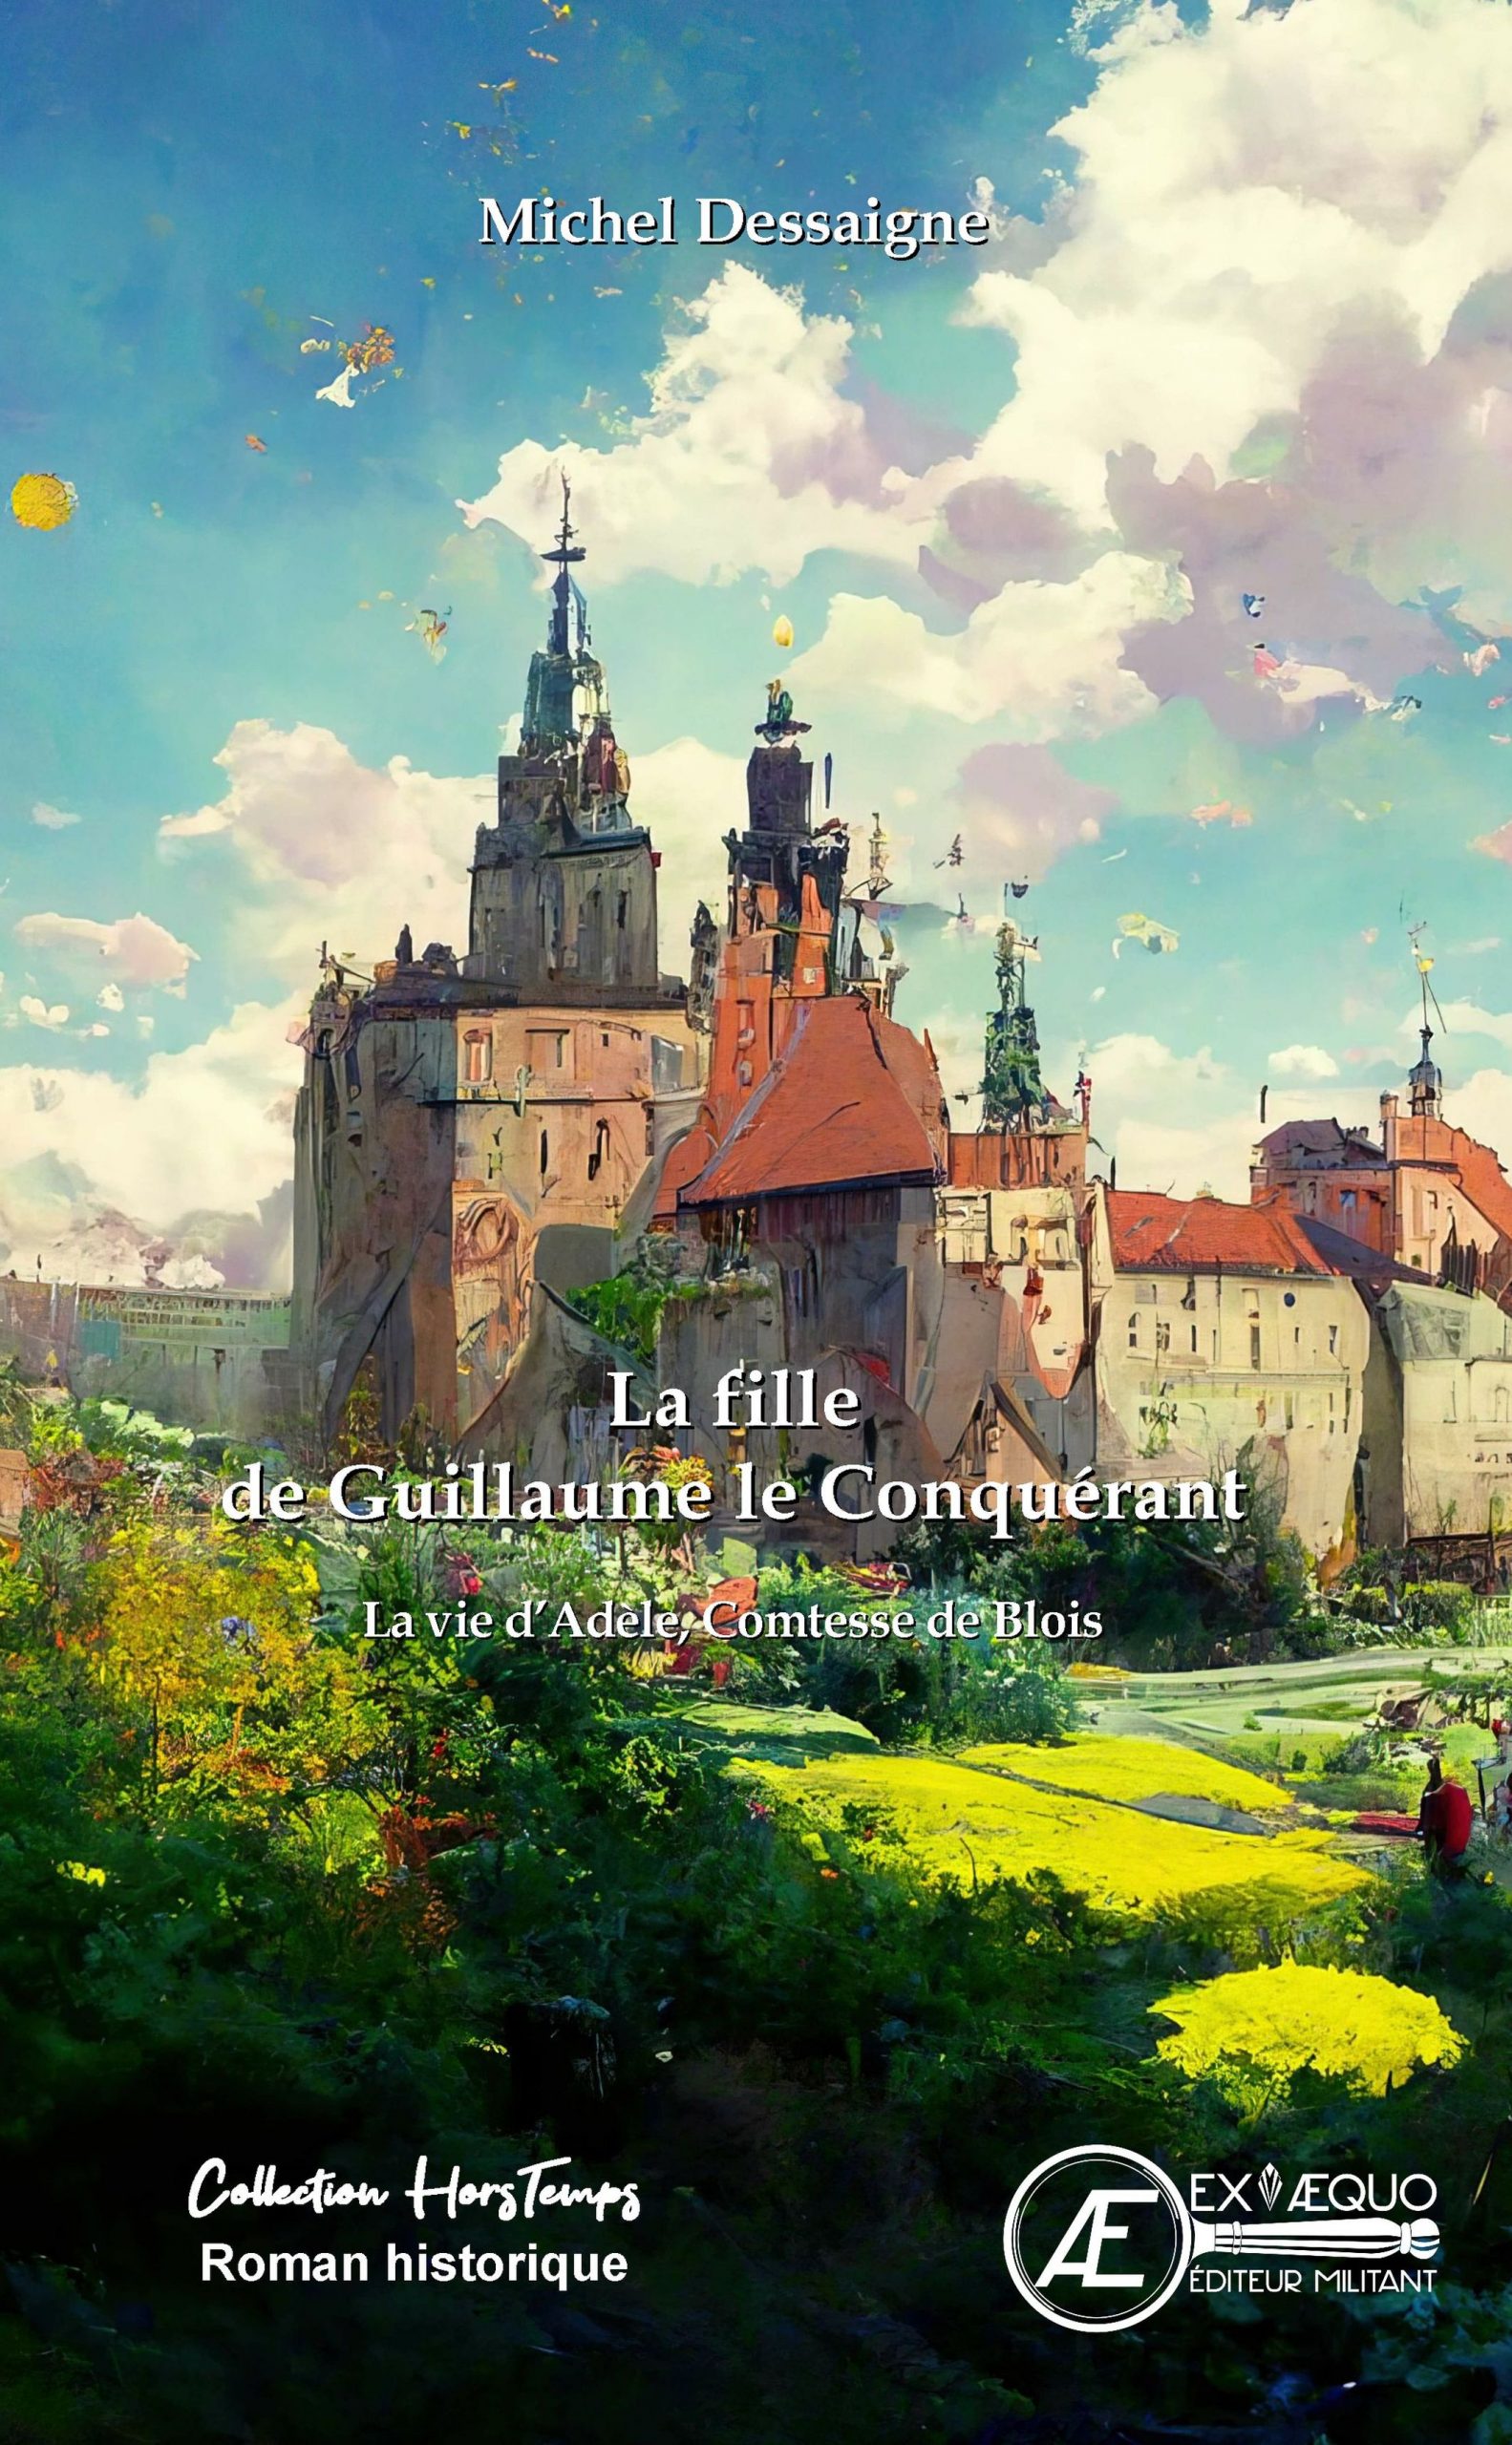 You are currently viewing La fille de Guillaume le Conquérant